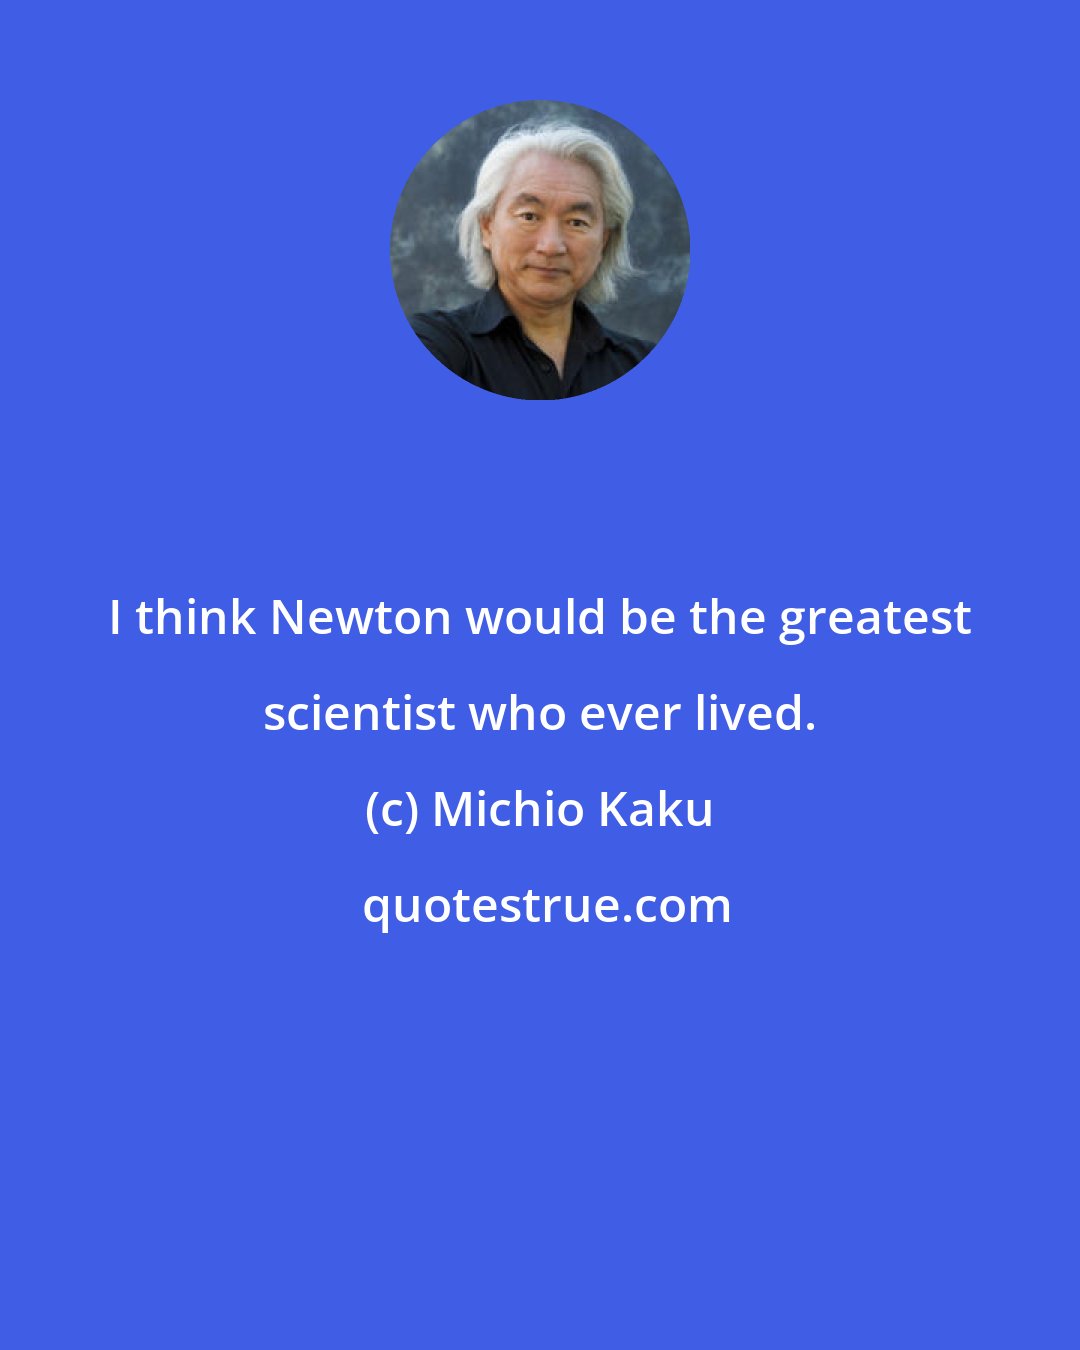 Michio Kaku: I think Newton would be the greatest scientist who ever lived.